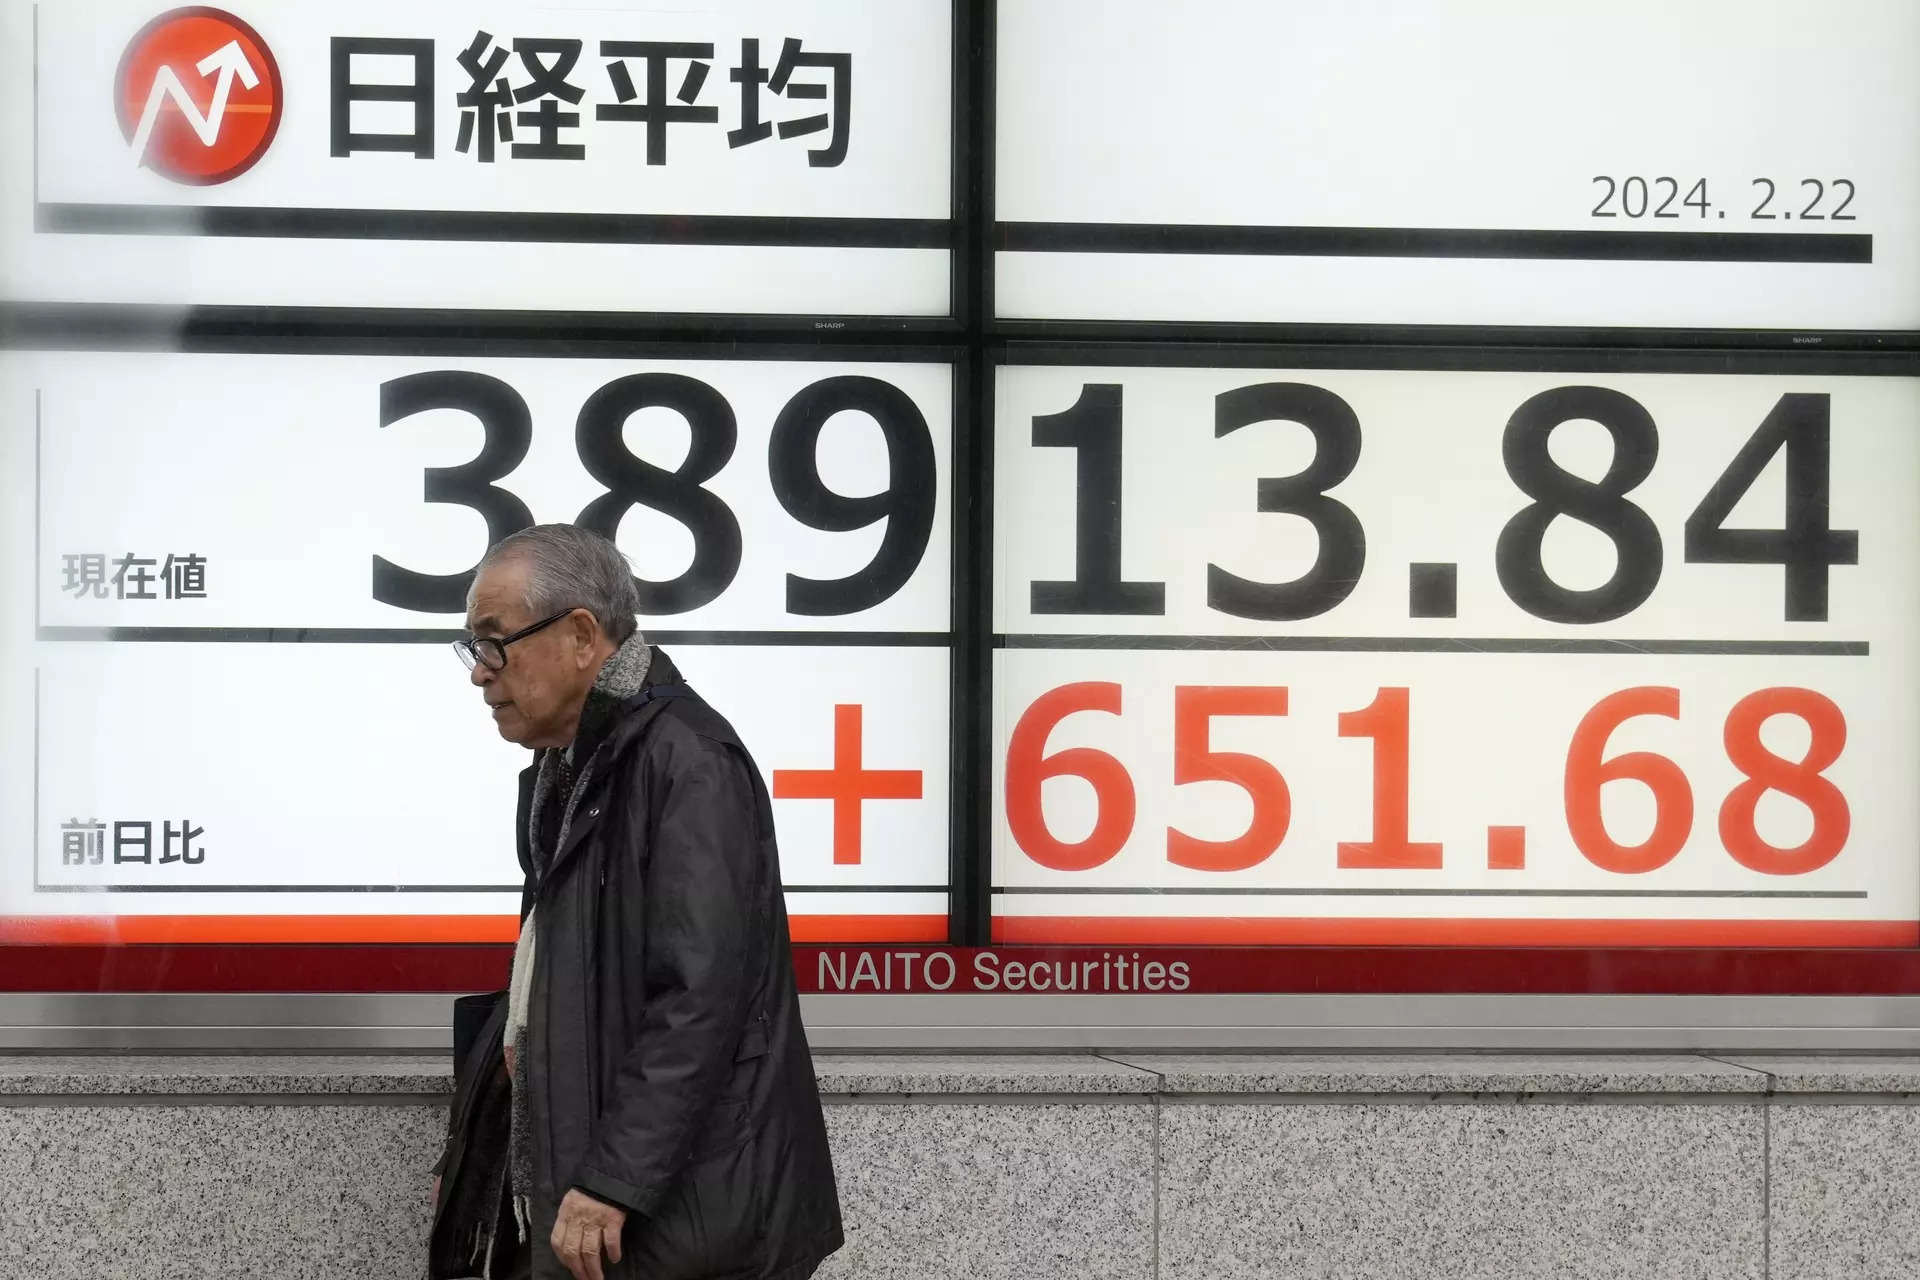 Japan's Nikkei closes at highest since mid-April as value shares rally 